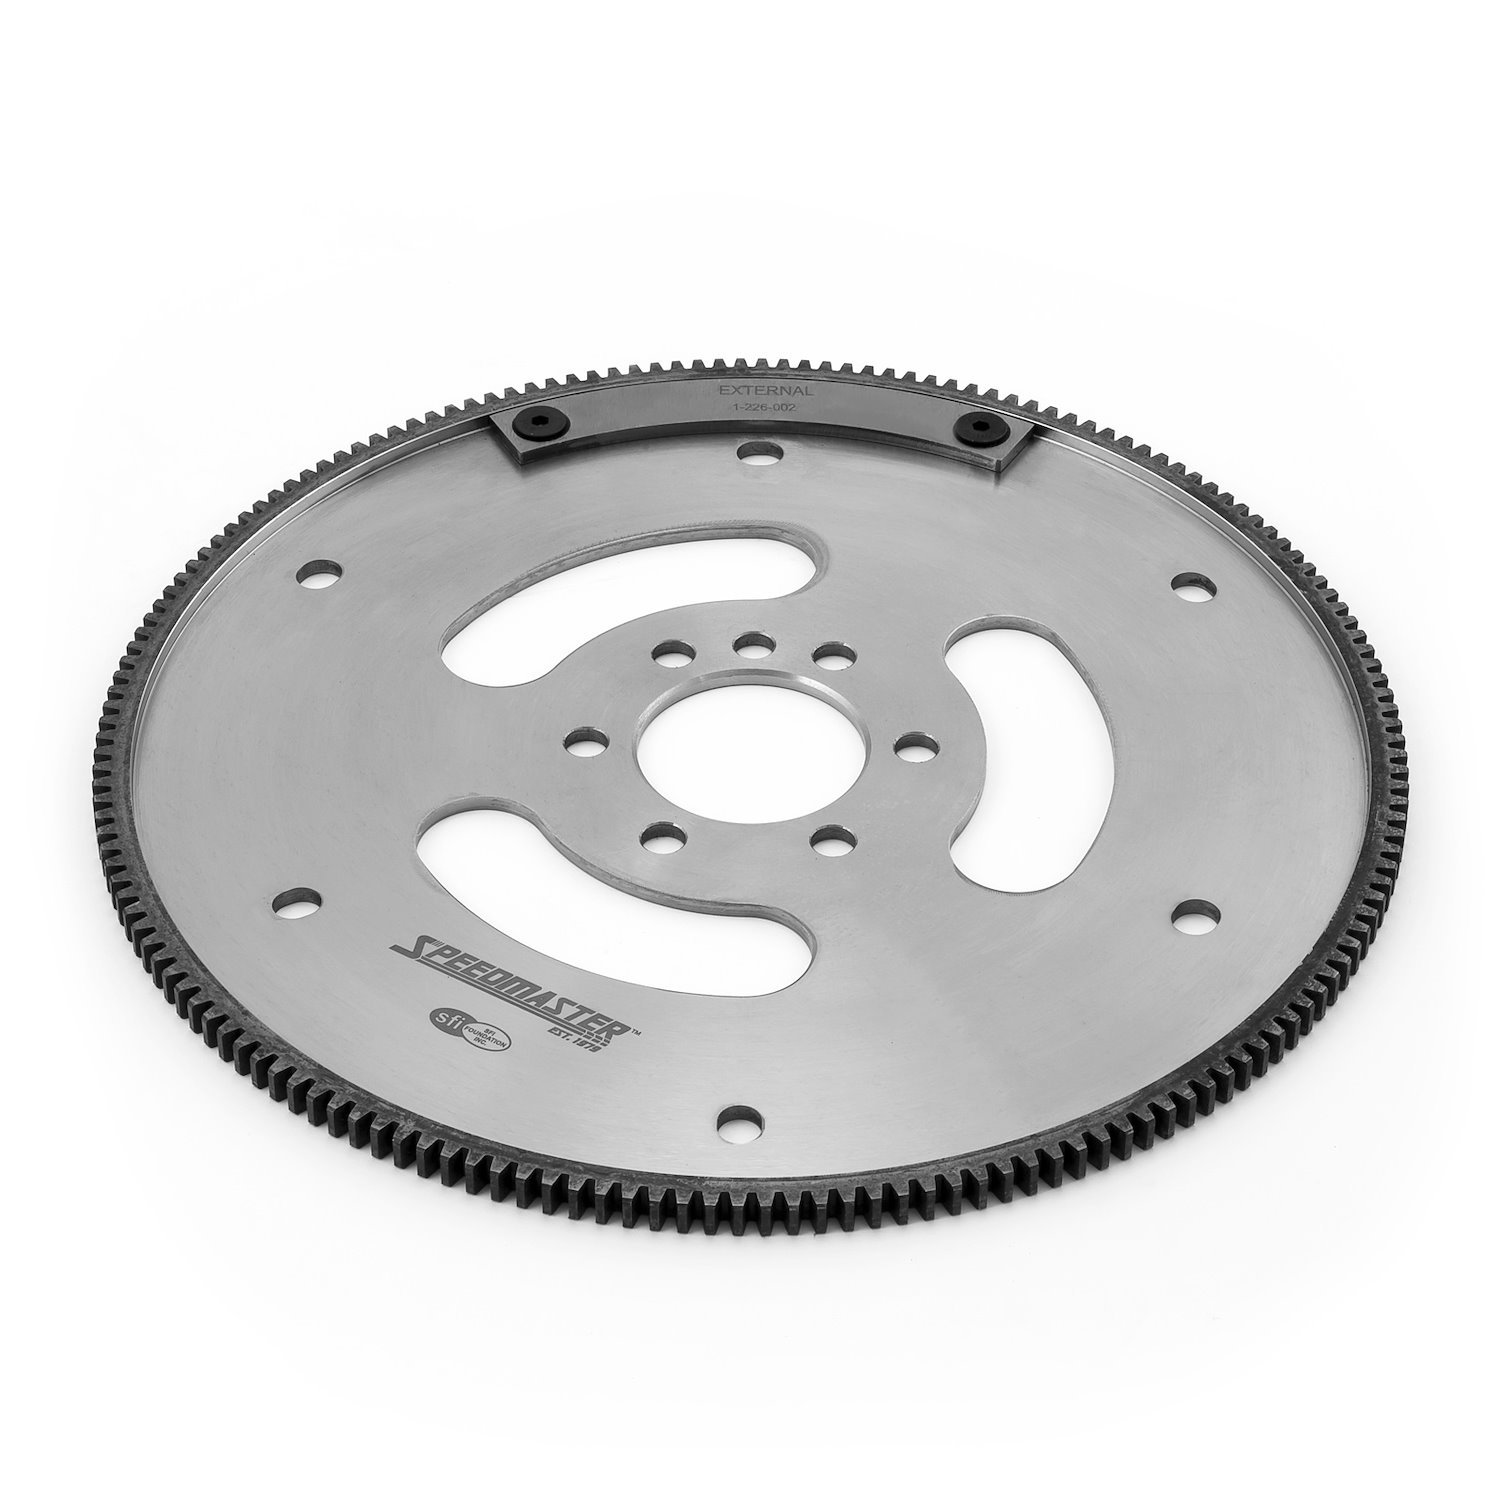 DNA Heavy-Duty Flexplate Small Block Chevy 350/Big Block Chevy 454, 168-Tooth